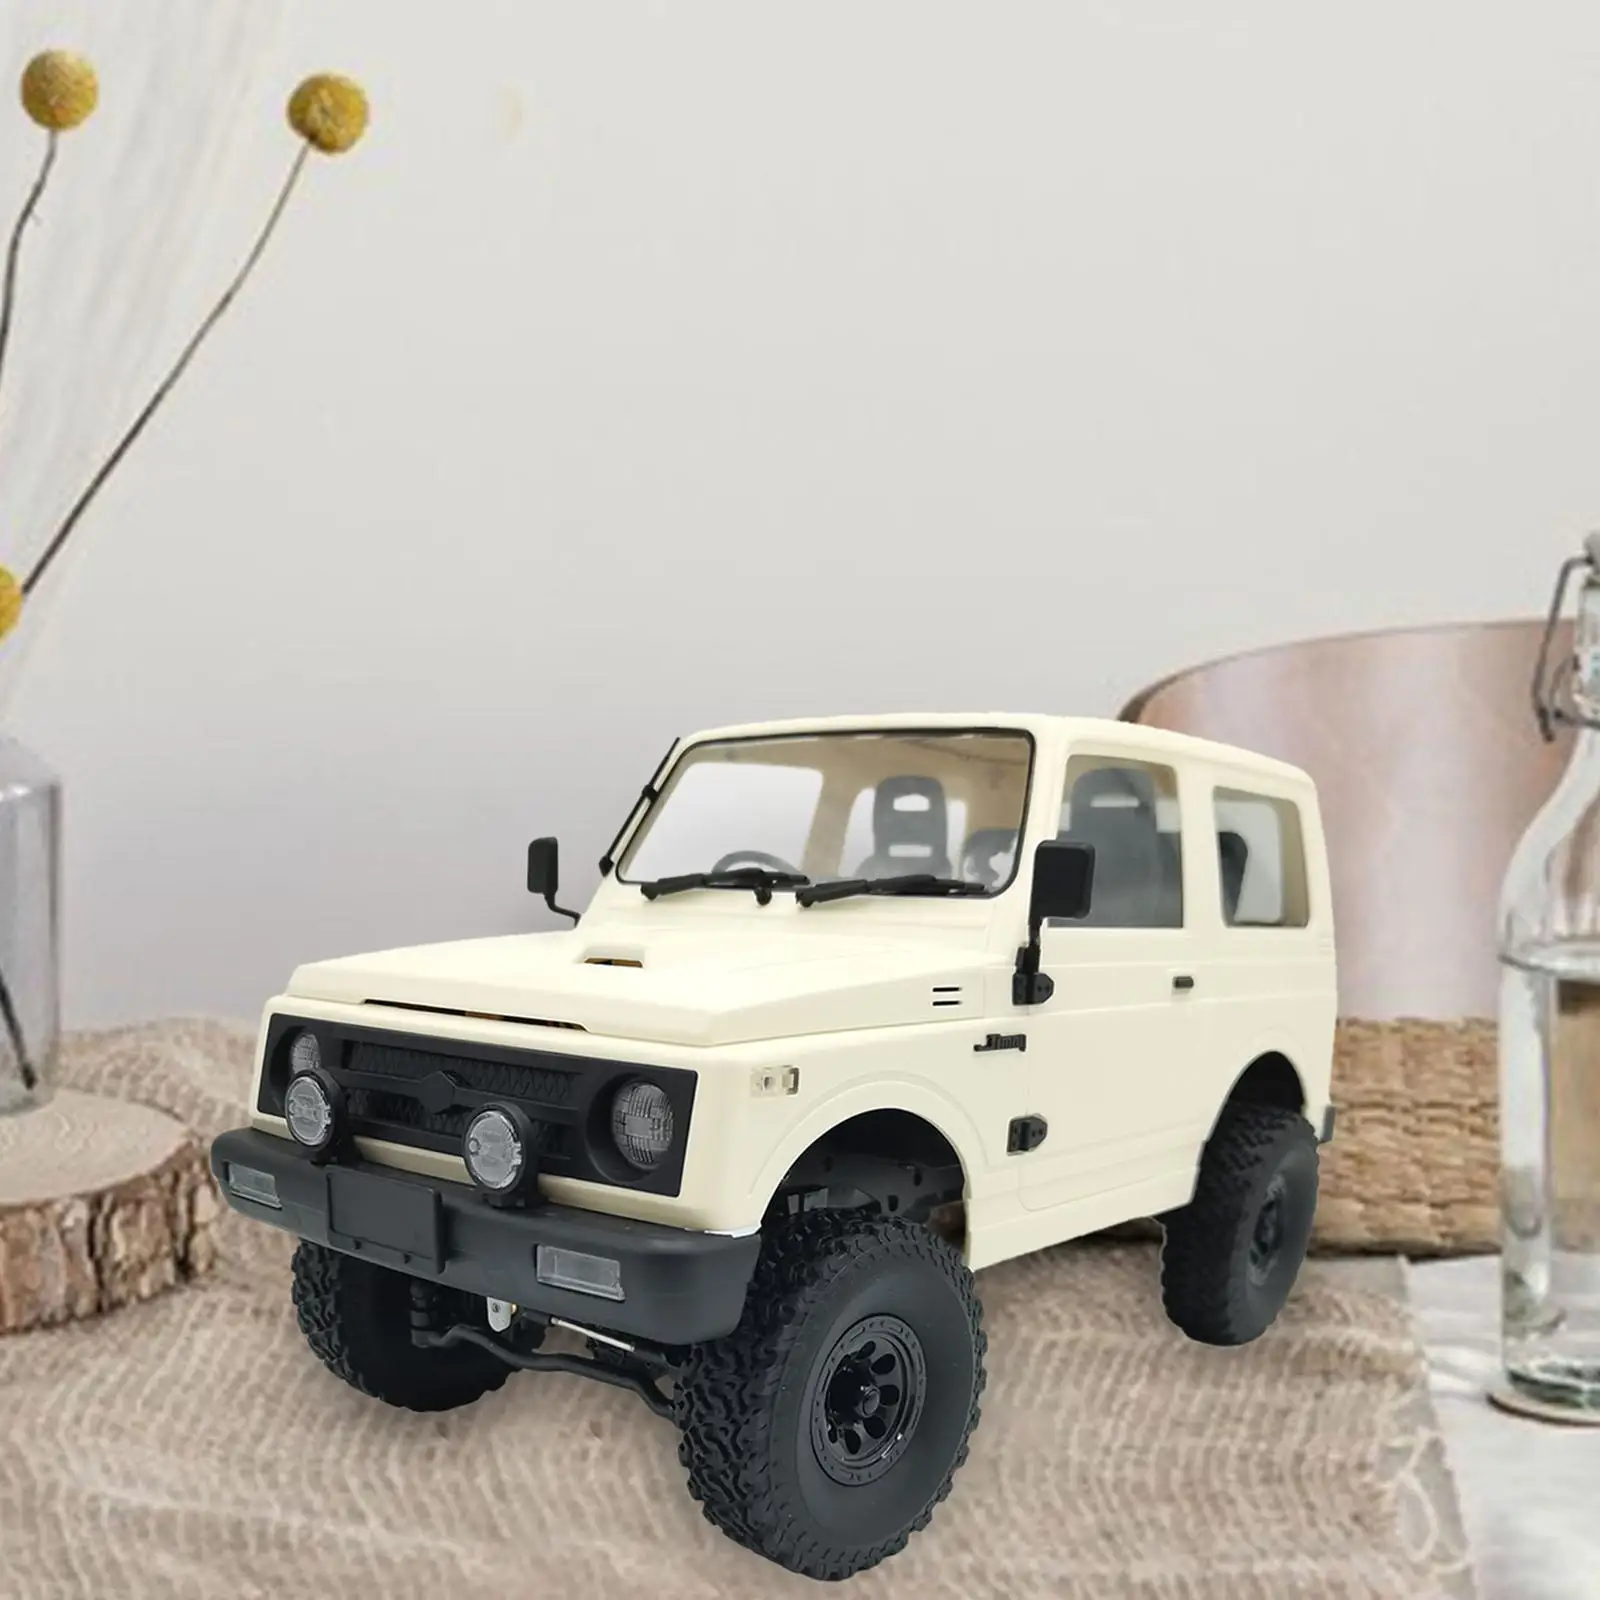 WL01 1:10 RC Truck 4WD Electric Hobby Toy Boys Girls Gifts C74 Crawler Vehicles Toy for Girl Kids Boy Children Party Favor